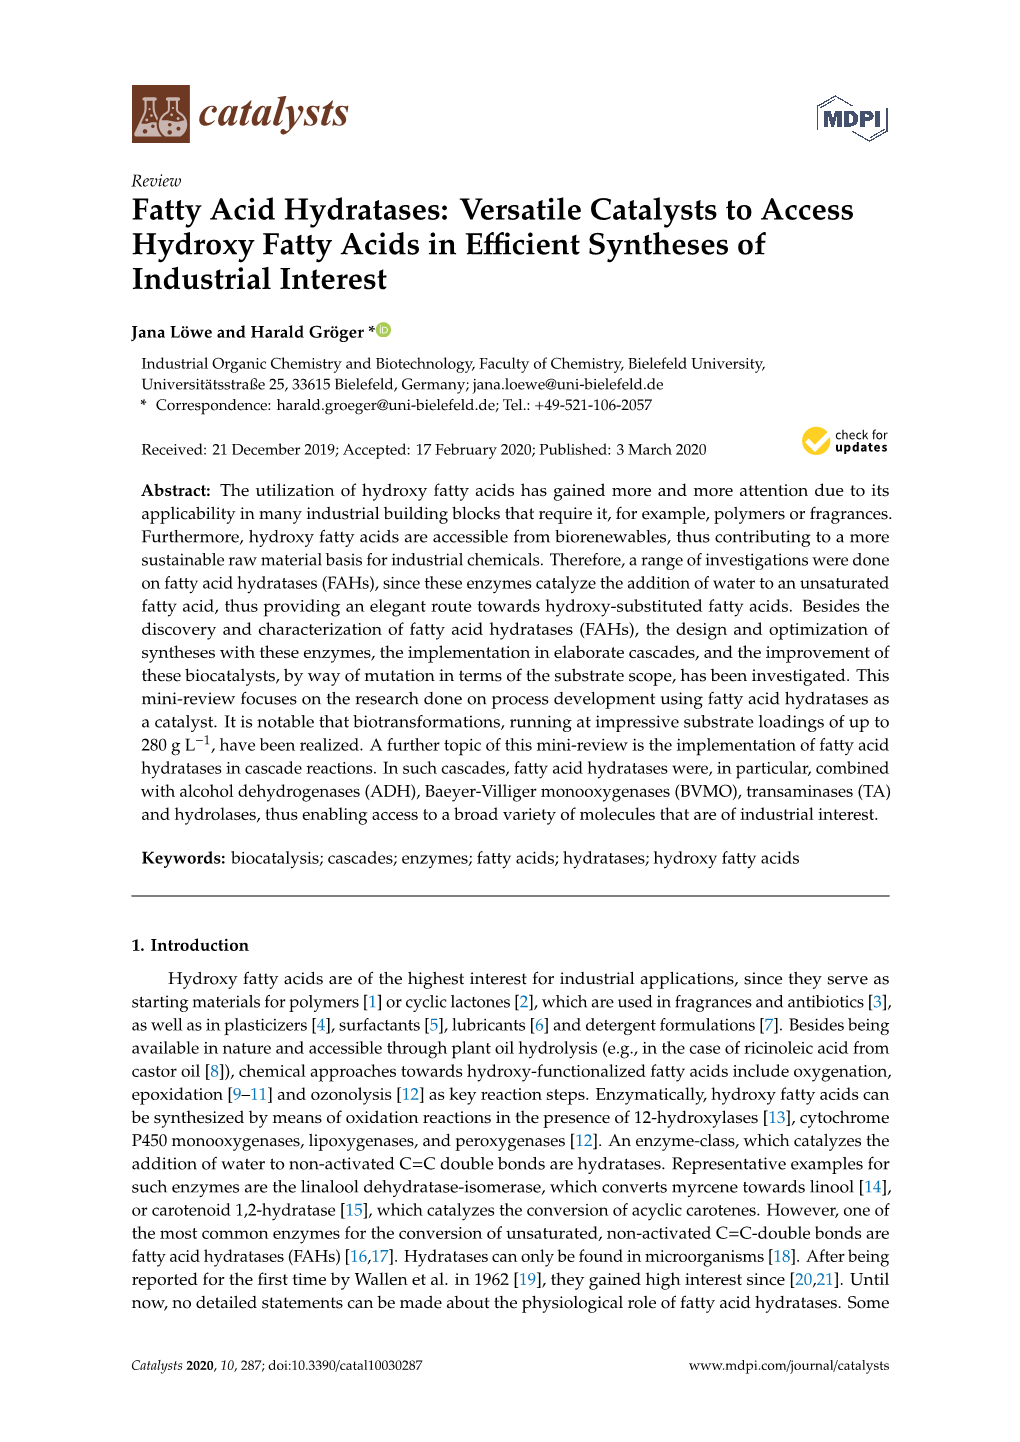 Fatty Acid Hydratases: Versatile Catalysts to Access Hydroxy Fatty Acids in Eﬃcient Syntheses of Industrial Interest